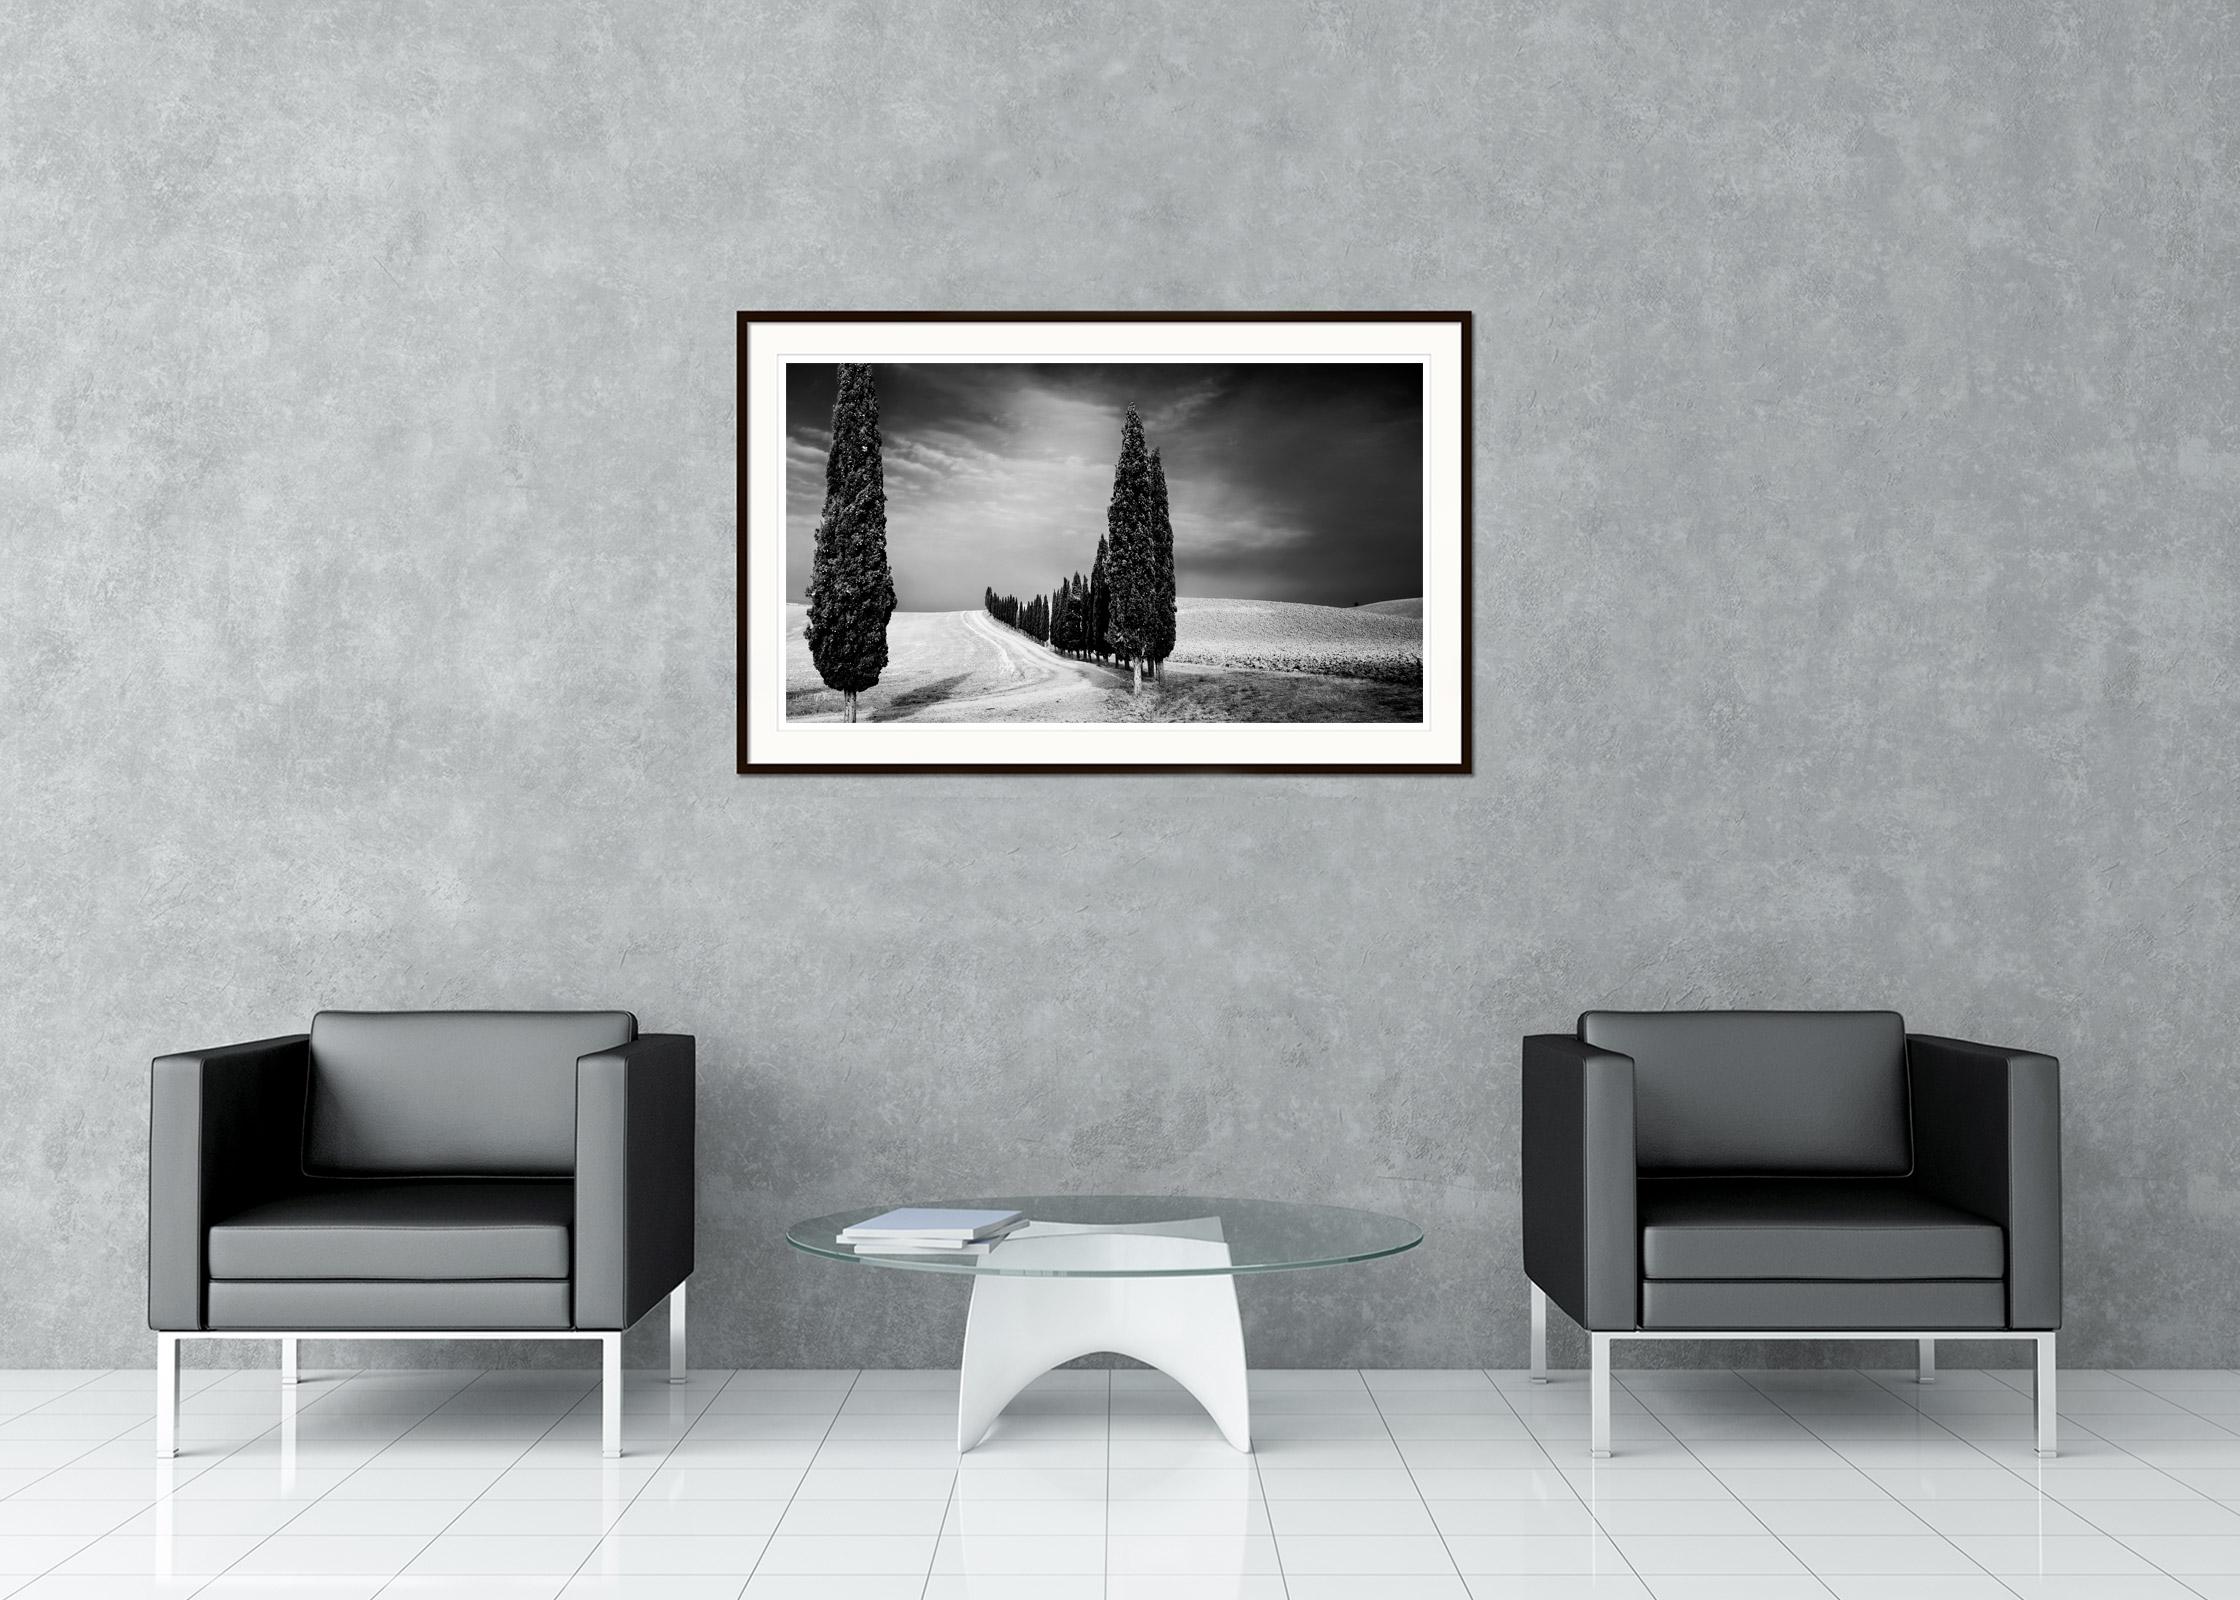 Black and white fine art panorama landscape photography print. Path along a wonderful avenue of cypress trees during a storm in Tuscany, Italy. Archival pigment ink print, edition of 7. Signed, titled, dated and numbered by artist. Certificate of